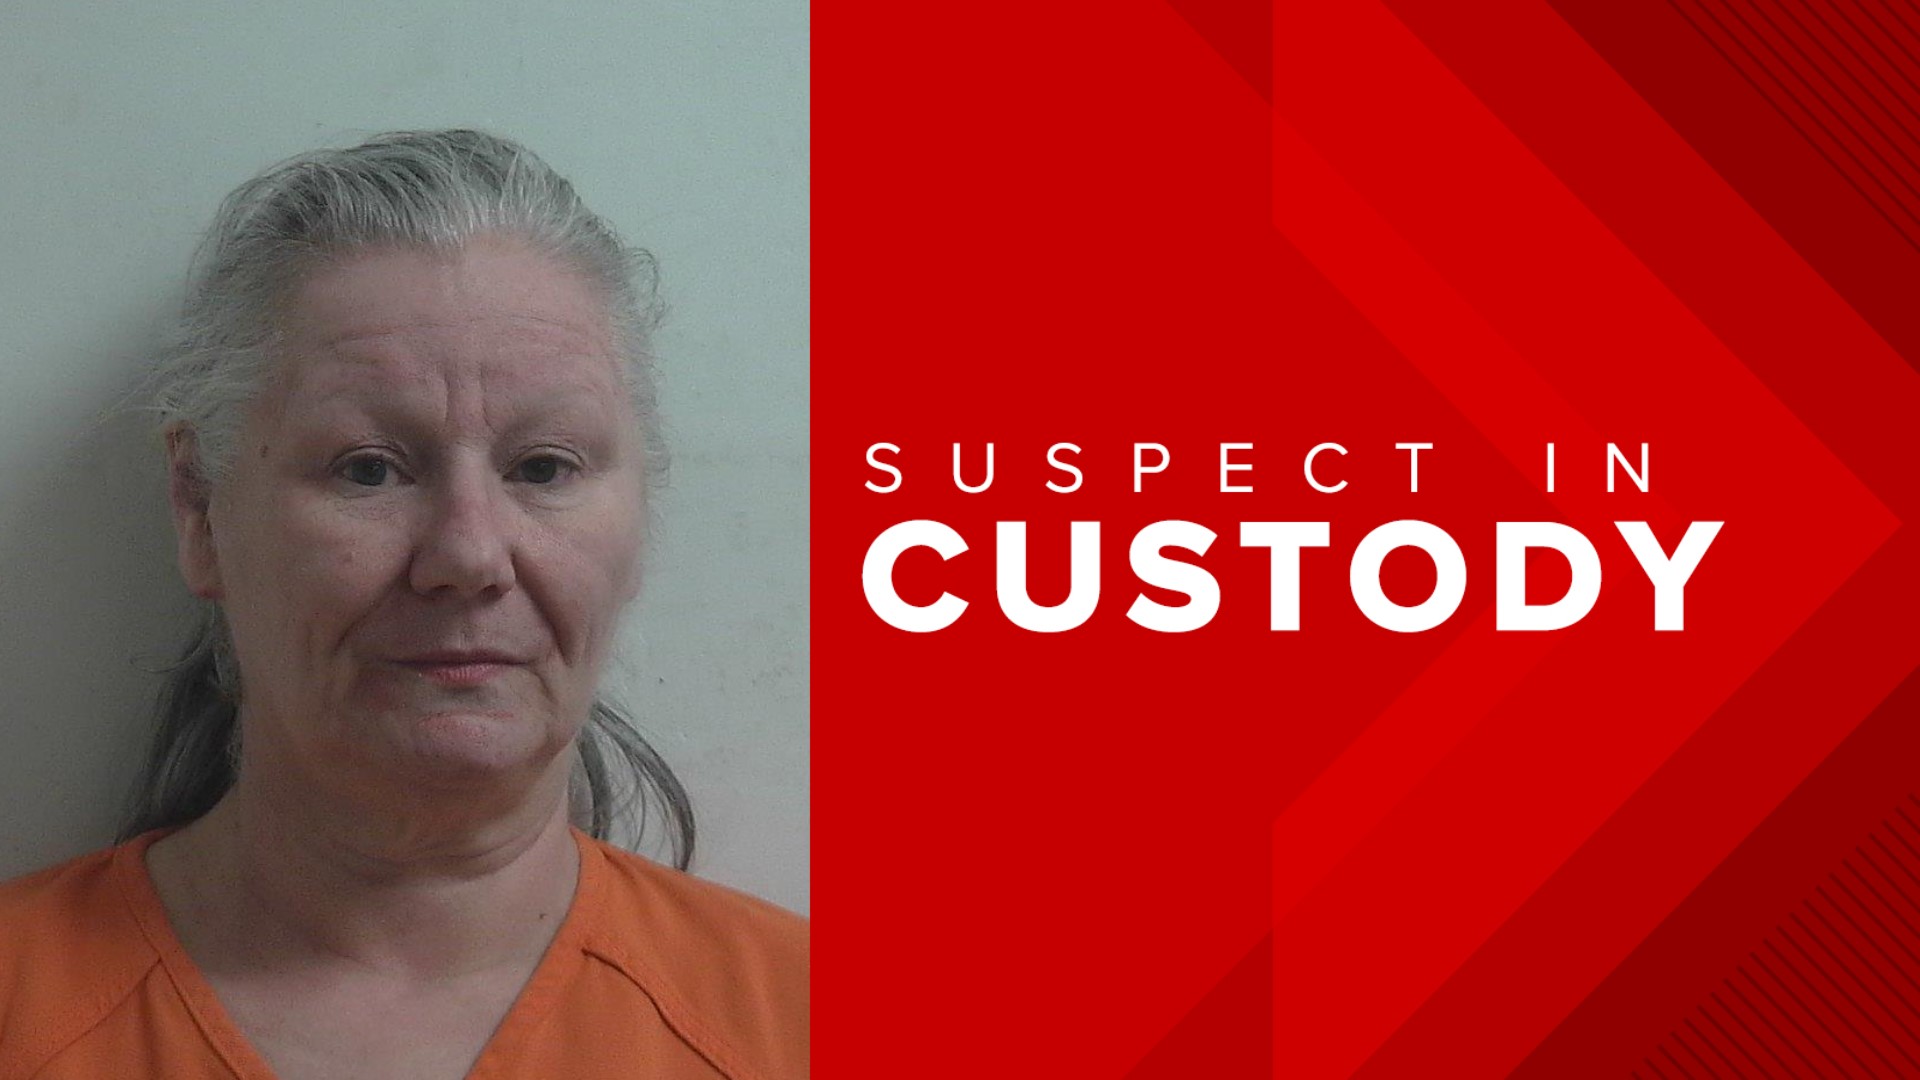 57-year-old Sherry Lyn Drew is facing criminal threatening charges.